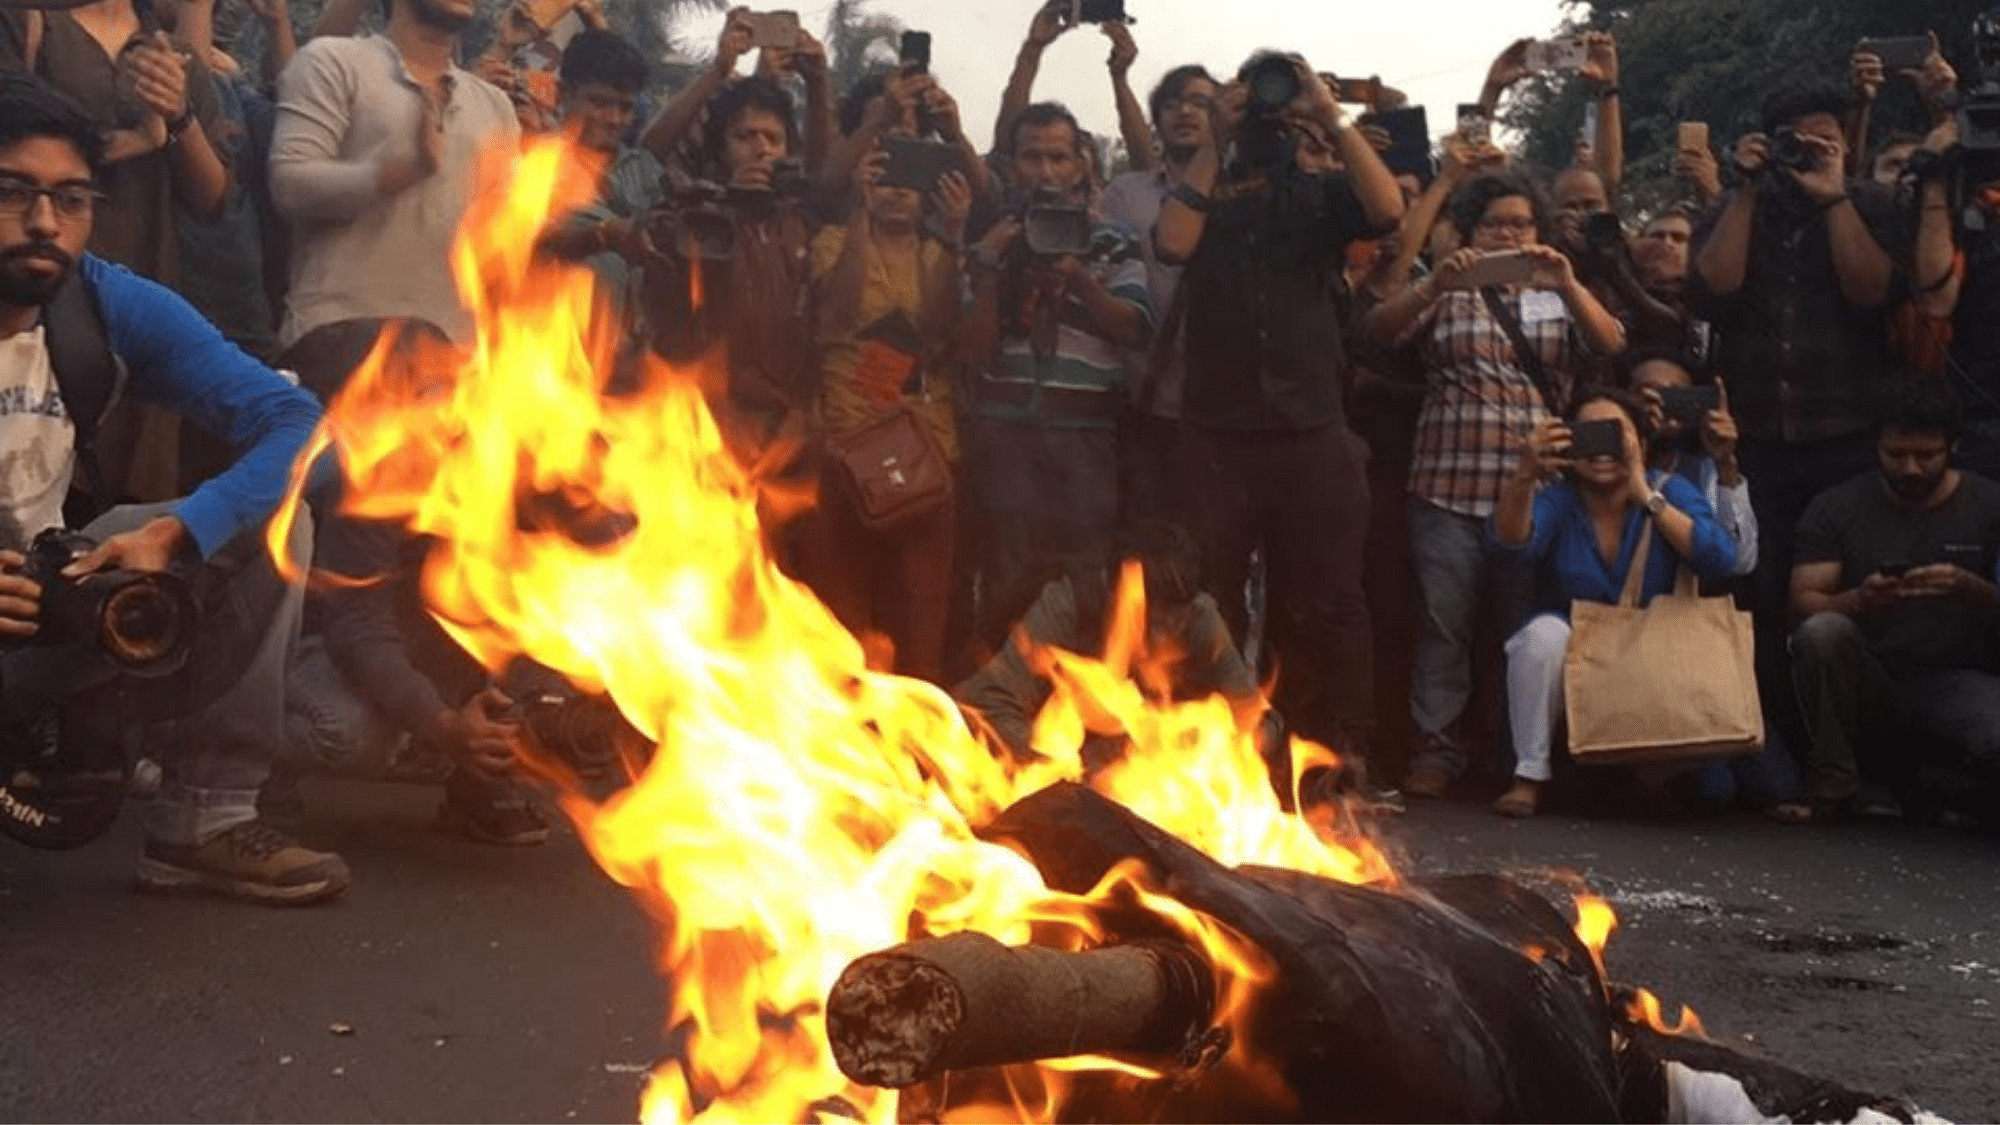 The protesters burned effigies of Prime Minister Narendra Modi and Home Minister Amit Shah, and also had a song dedication for the duo.